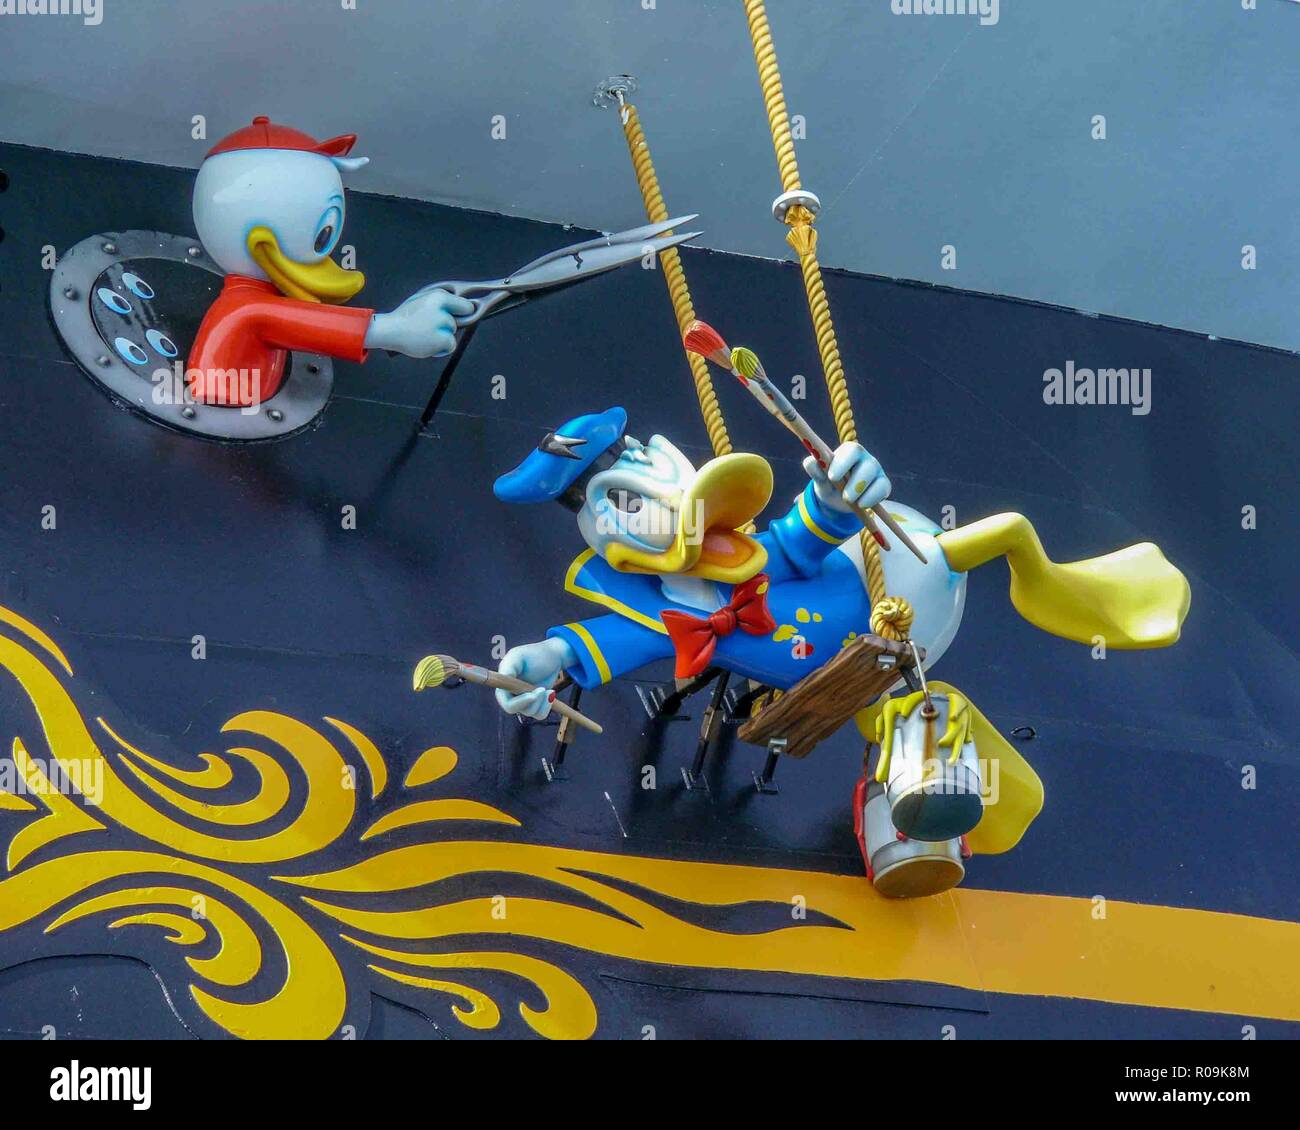 Nassau, New Providence, Bahamas. 16th Jan, 2009. Disney characters Donald Duck and nephews hang from the stern of Disney Cruise Lines Disney Wonder docked in the port of Nassau in the Bahamas, a popular cruise-ship destination. Credit: Arnold Drapkin/ZUMA Wire/Alamy Live News Stock Photo